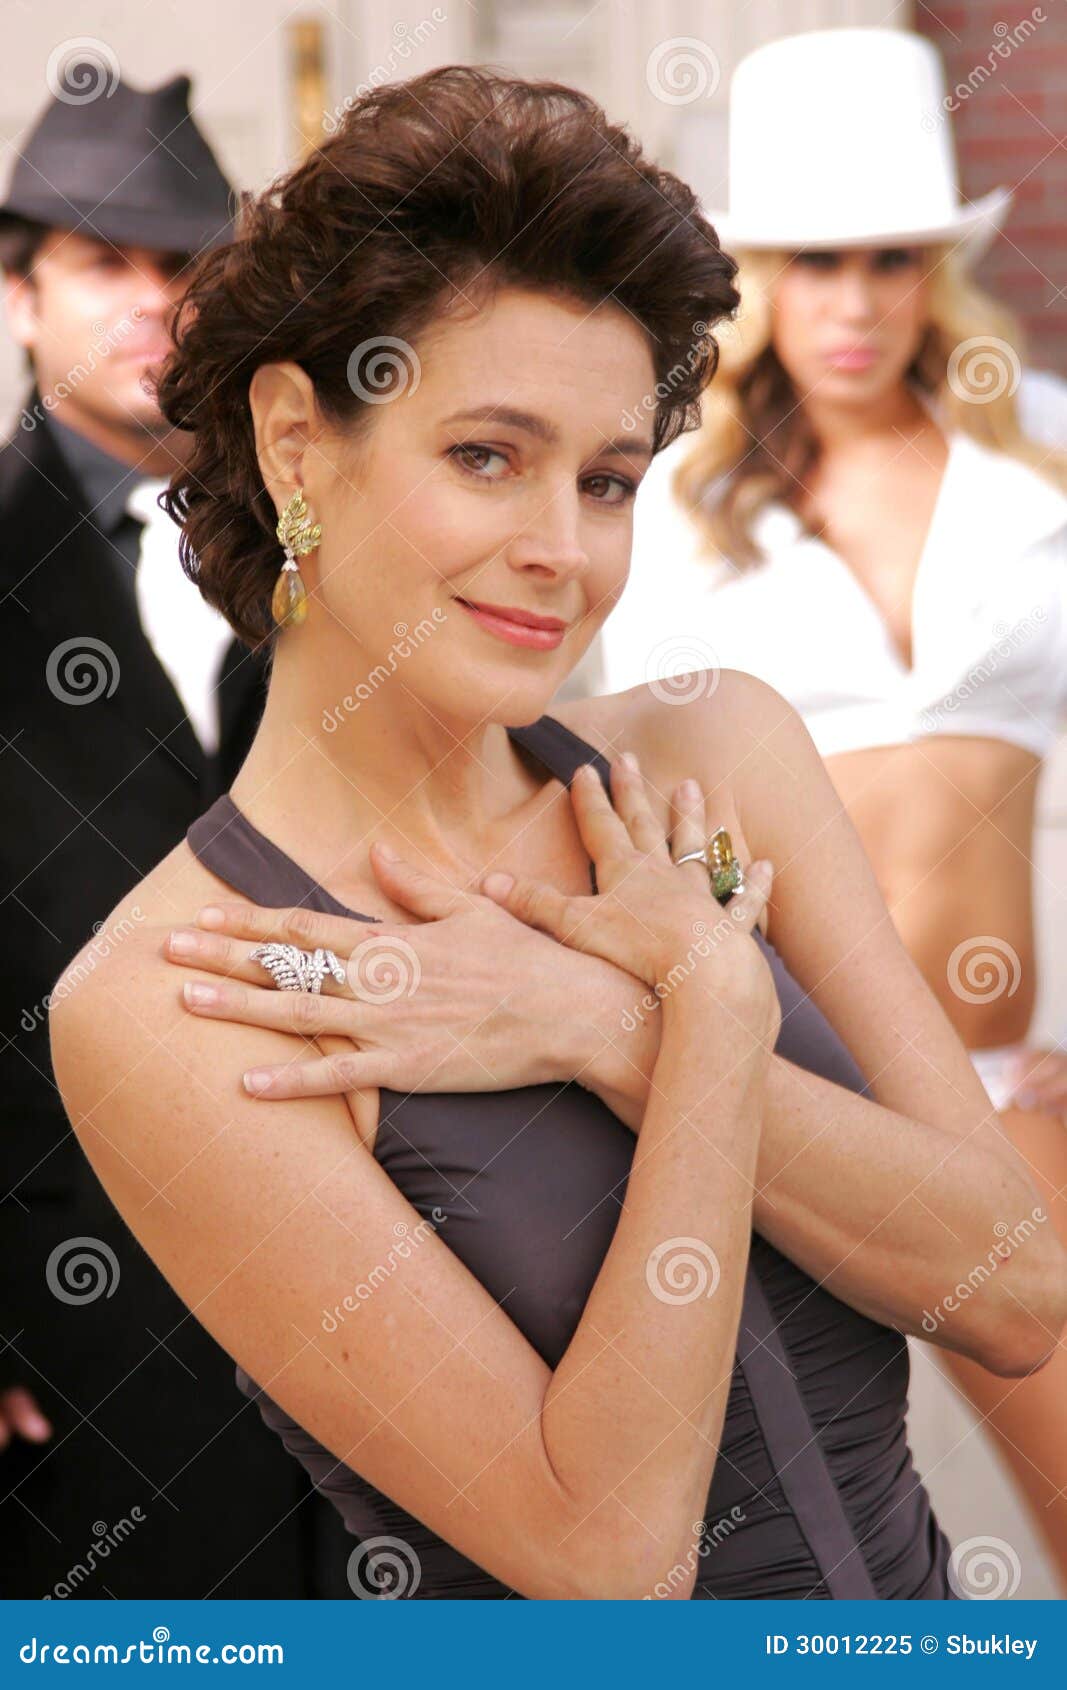 Sean young pic